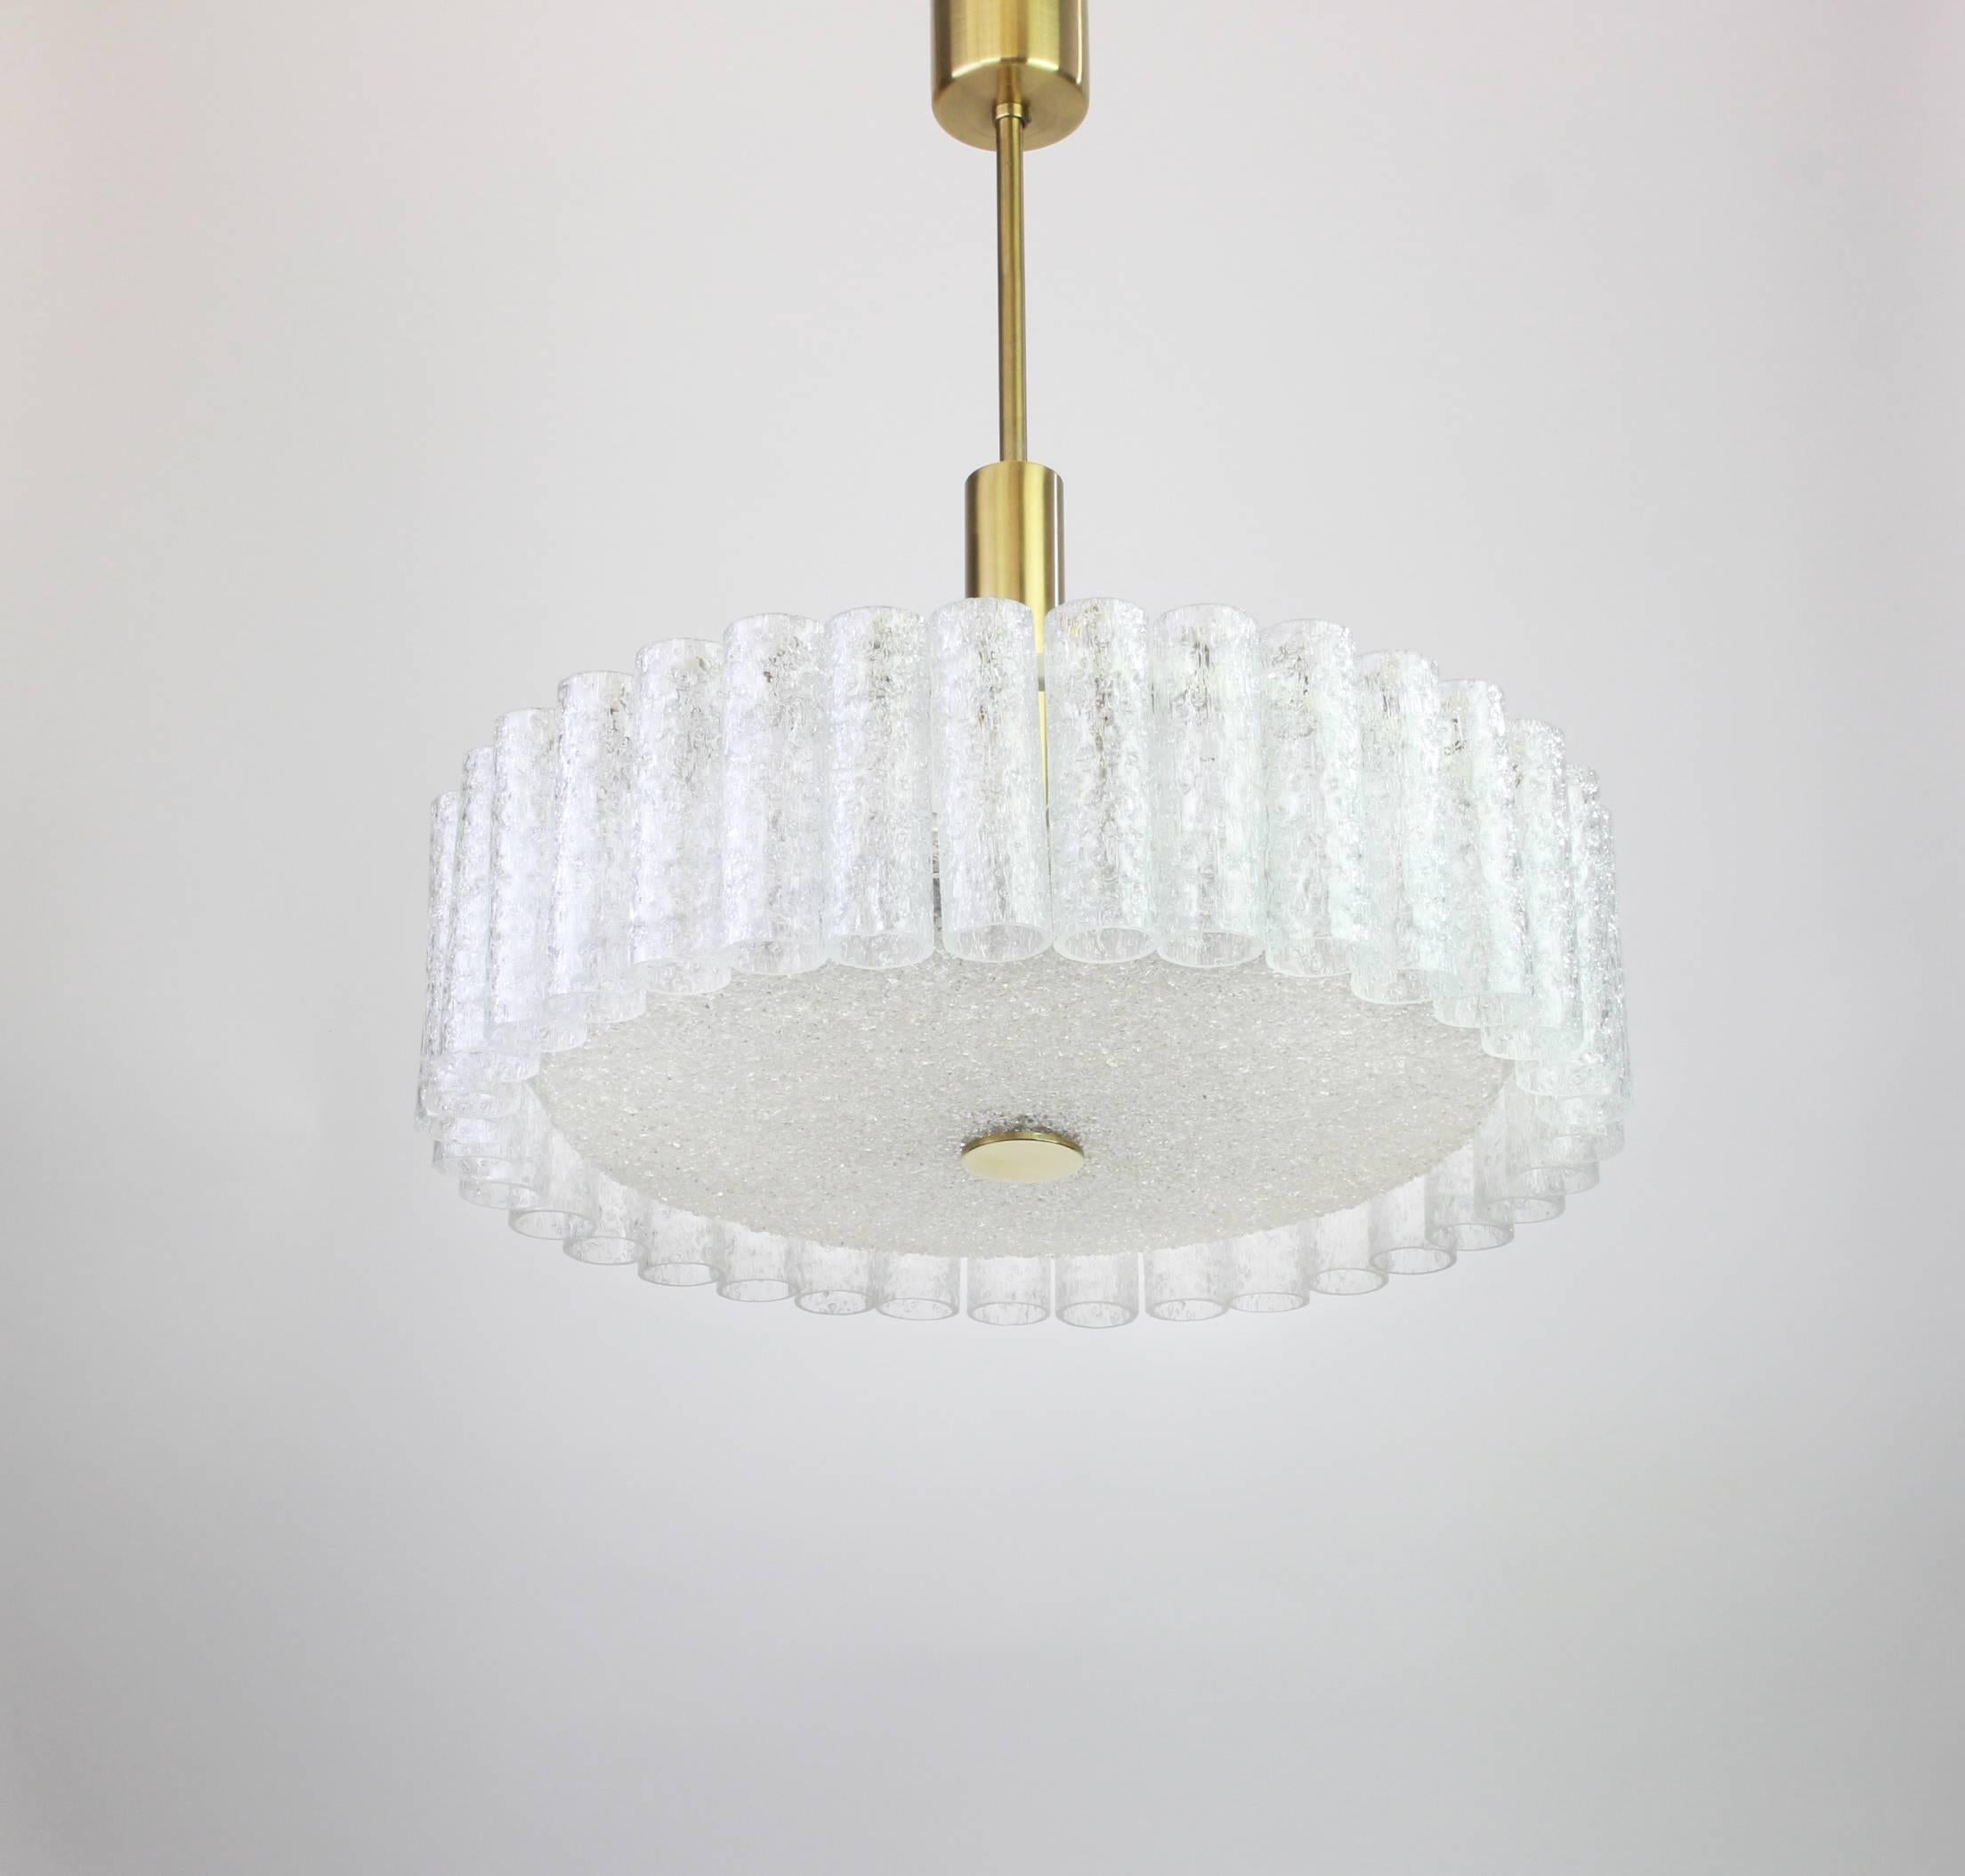 Fantastic midcentury chandelier by Doria, Germany, manufactured circa 1970-1979, with 35 Murano glass cylinders suspended from a fixture.

High quality and in very good condition. Cleaned, well-wired and ready to use. 

The fixture requires 6 x